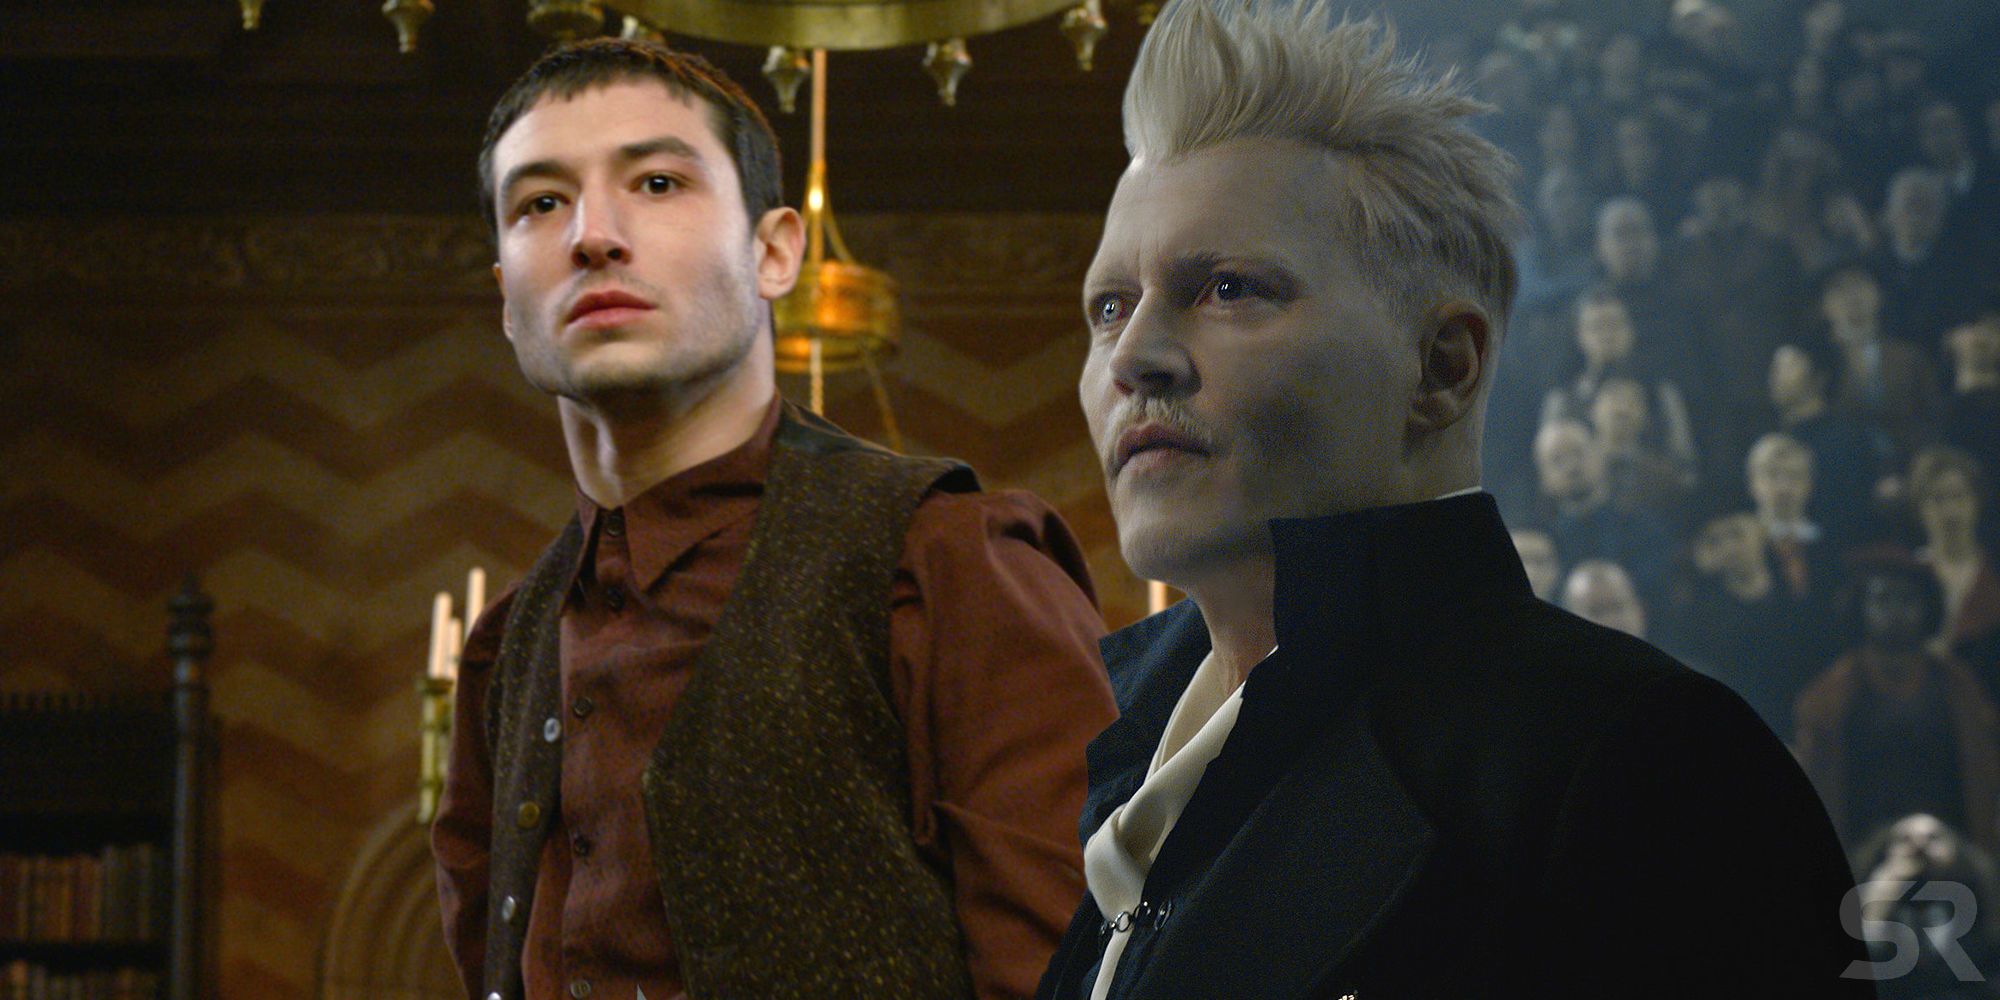 Fantastic Beasts Credence and Grindelwald